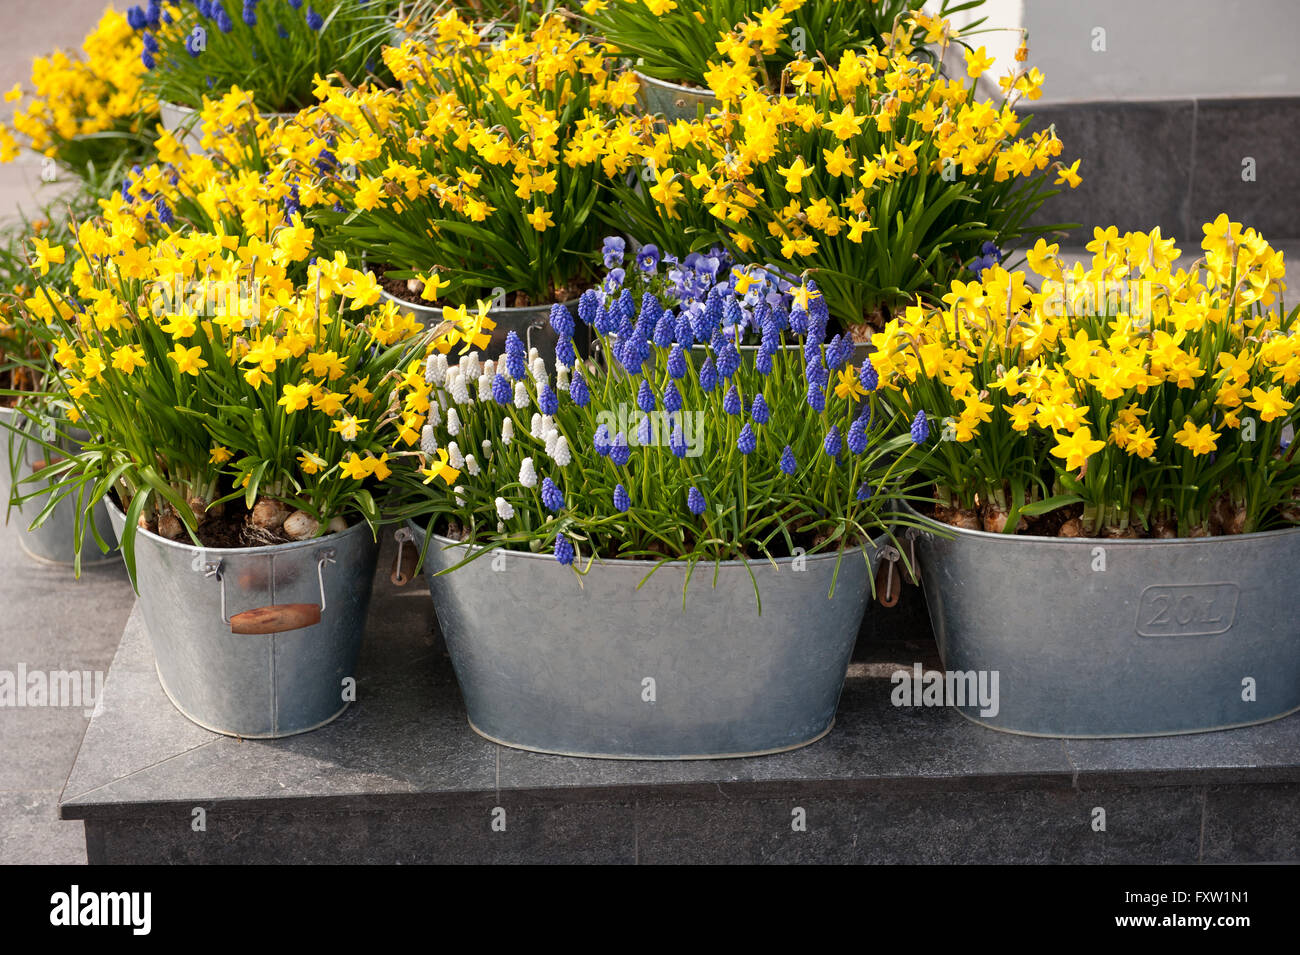 Daffodil and grape hyacinth flowers city decoration, yellow and blue flowering plants growing in metal flower buckets outdoor. Stock Photo